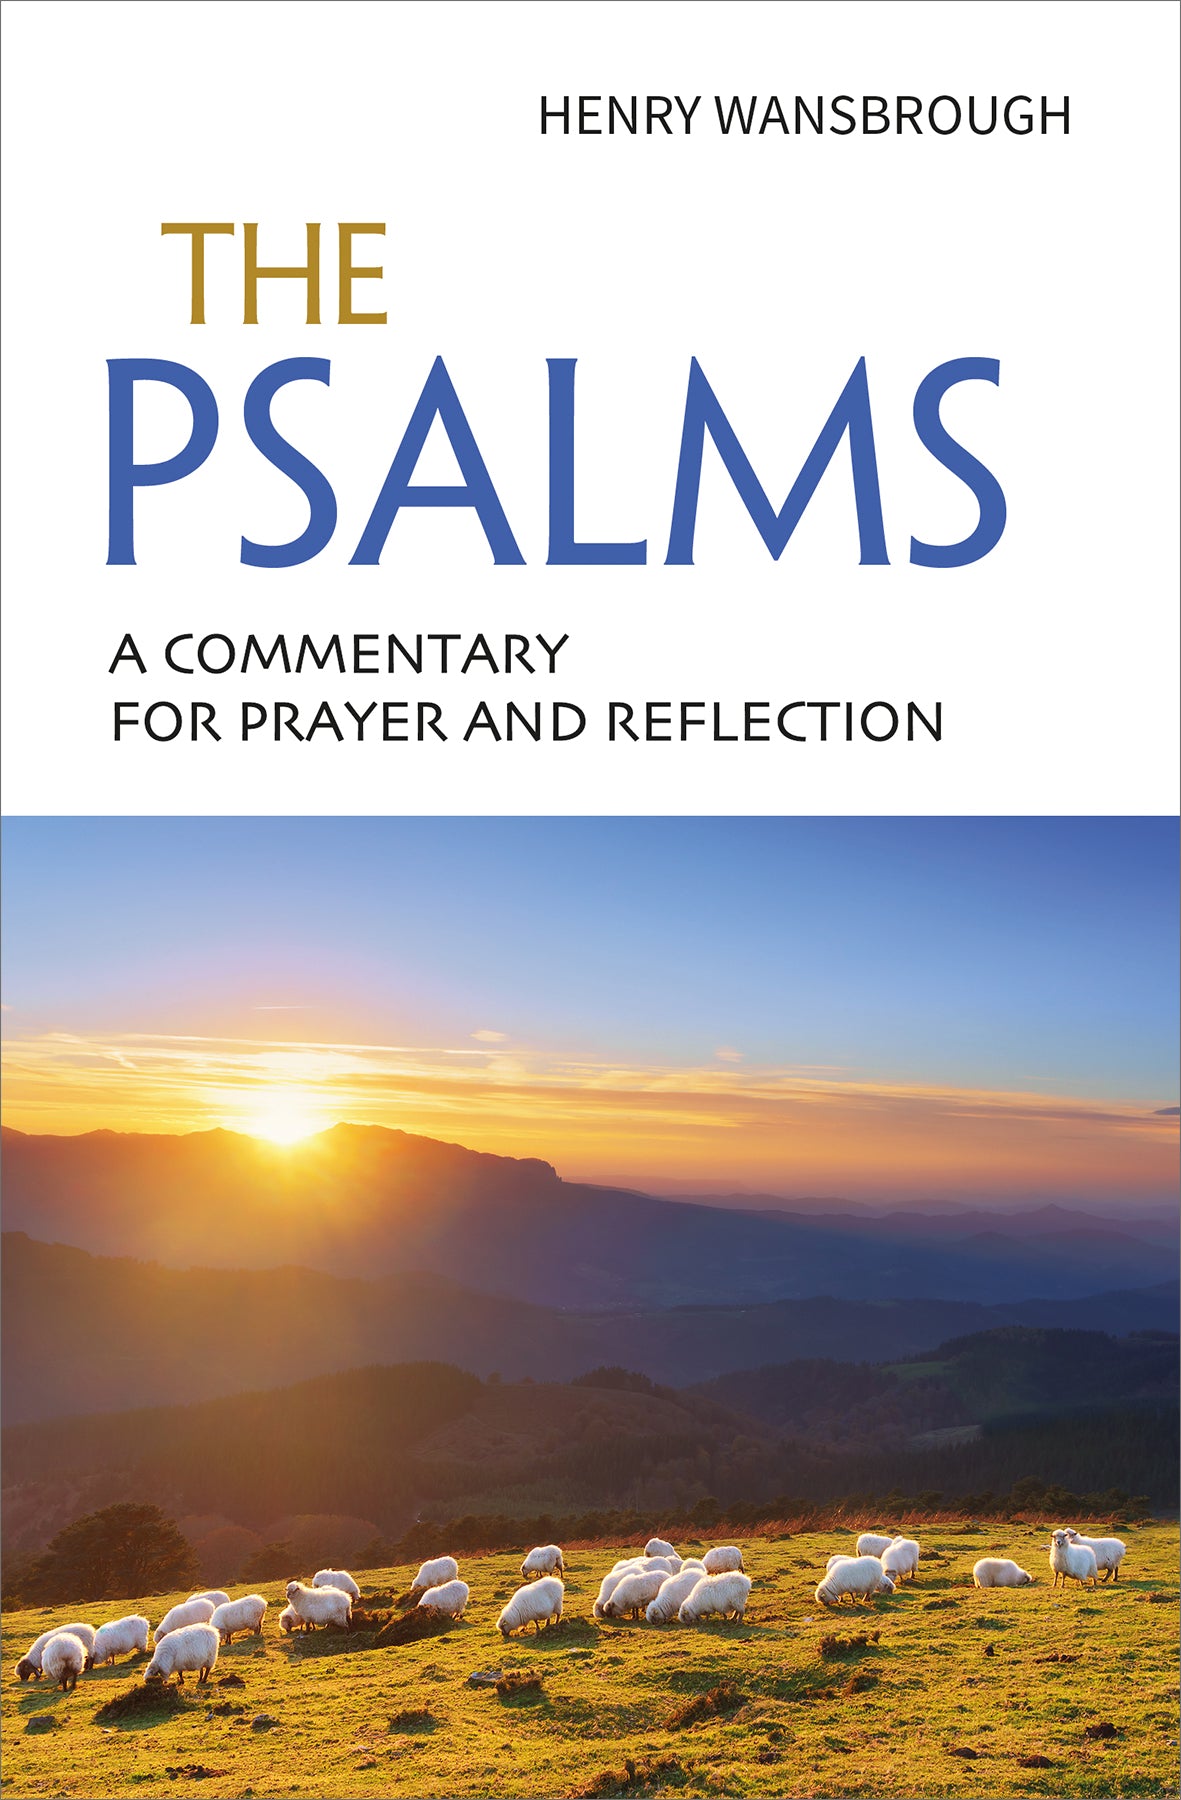 Image of The Psalms other